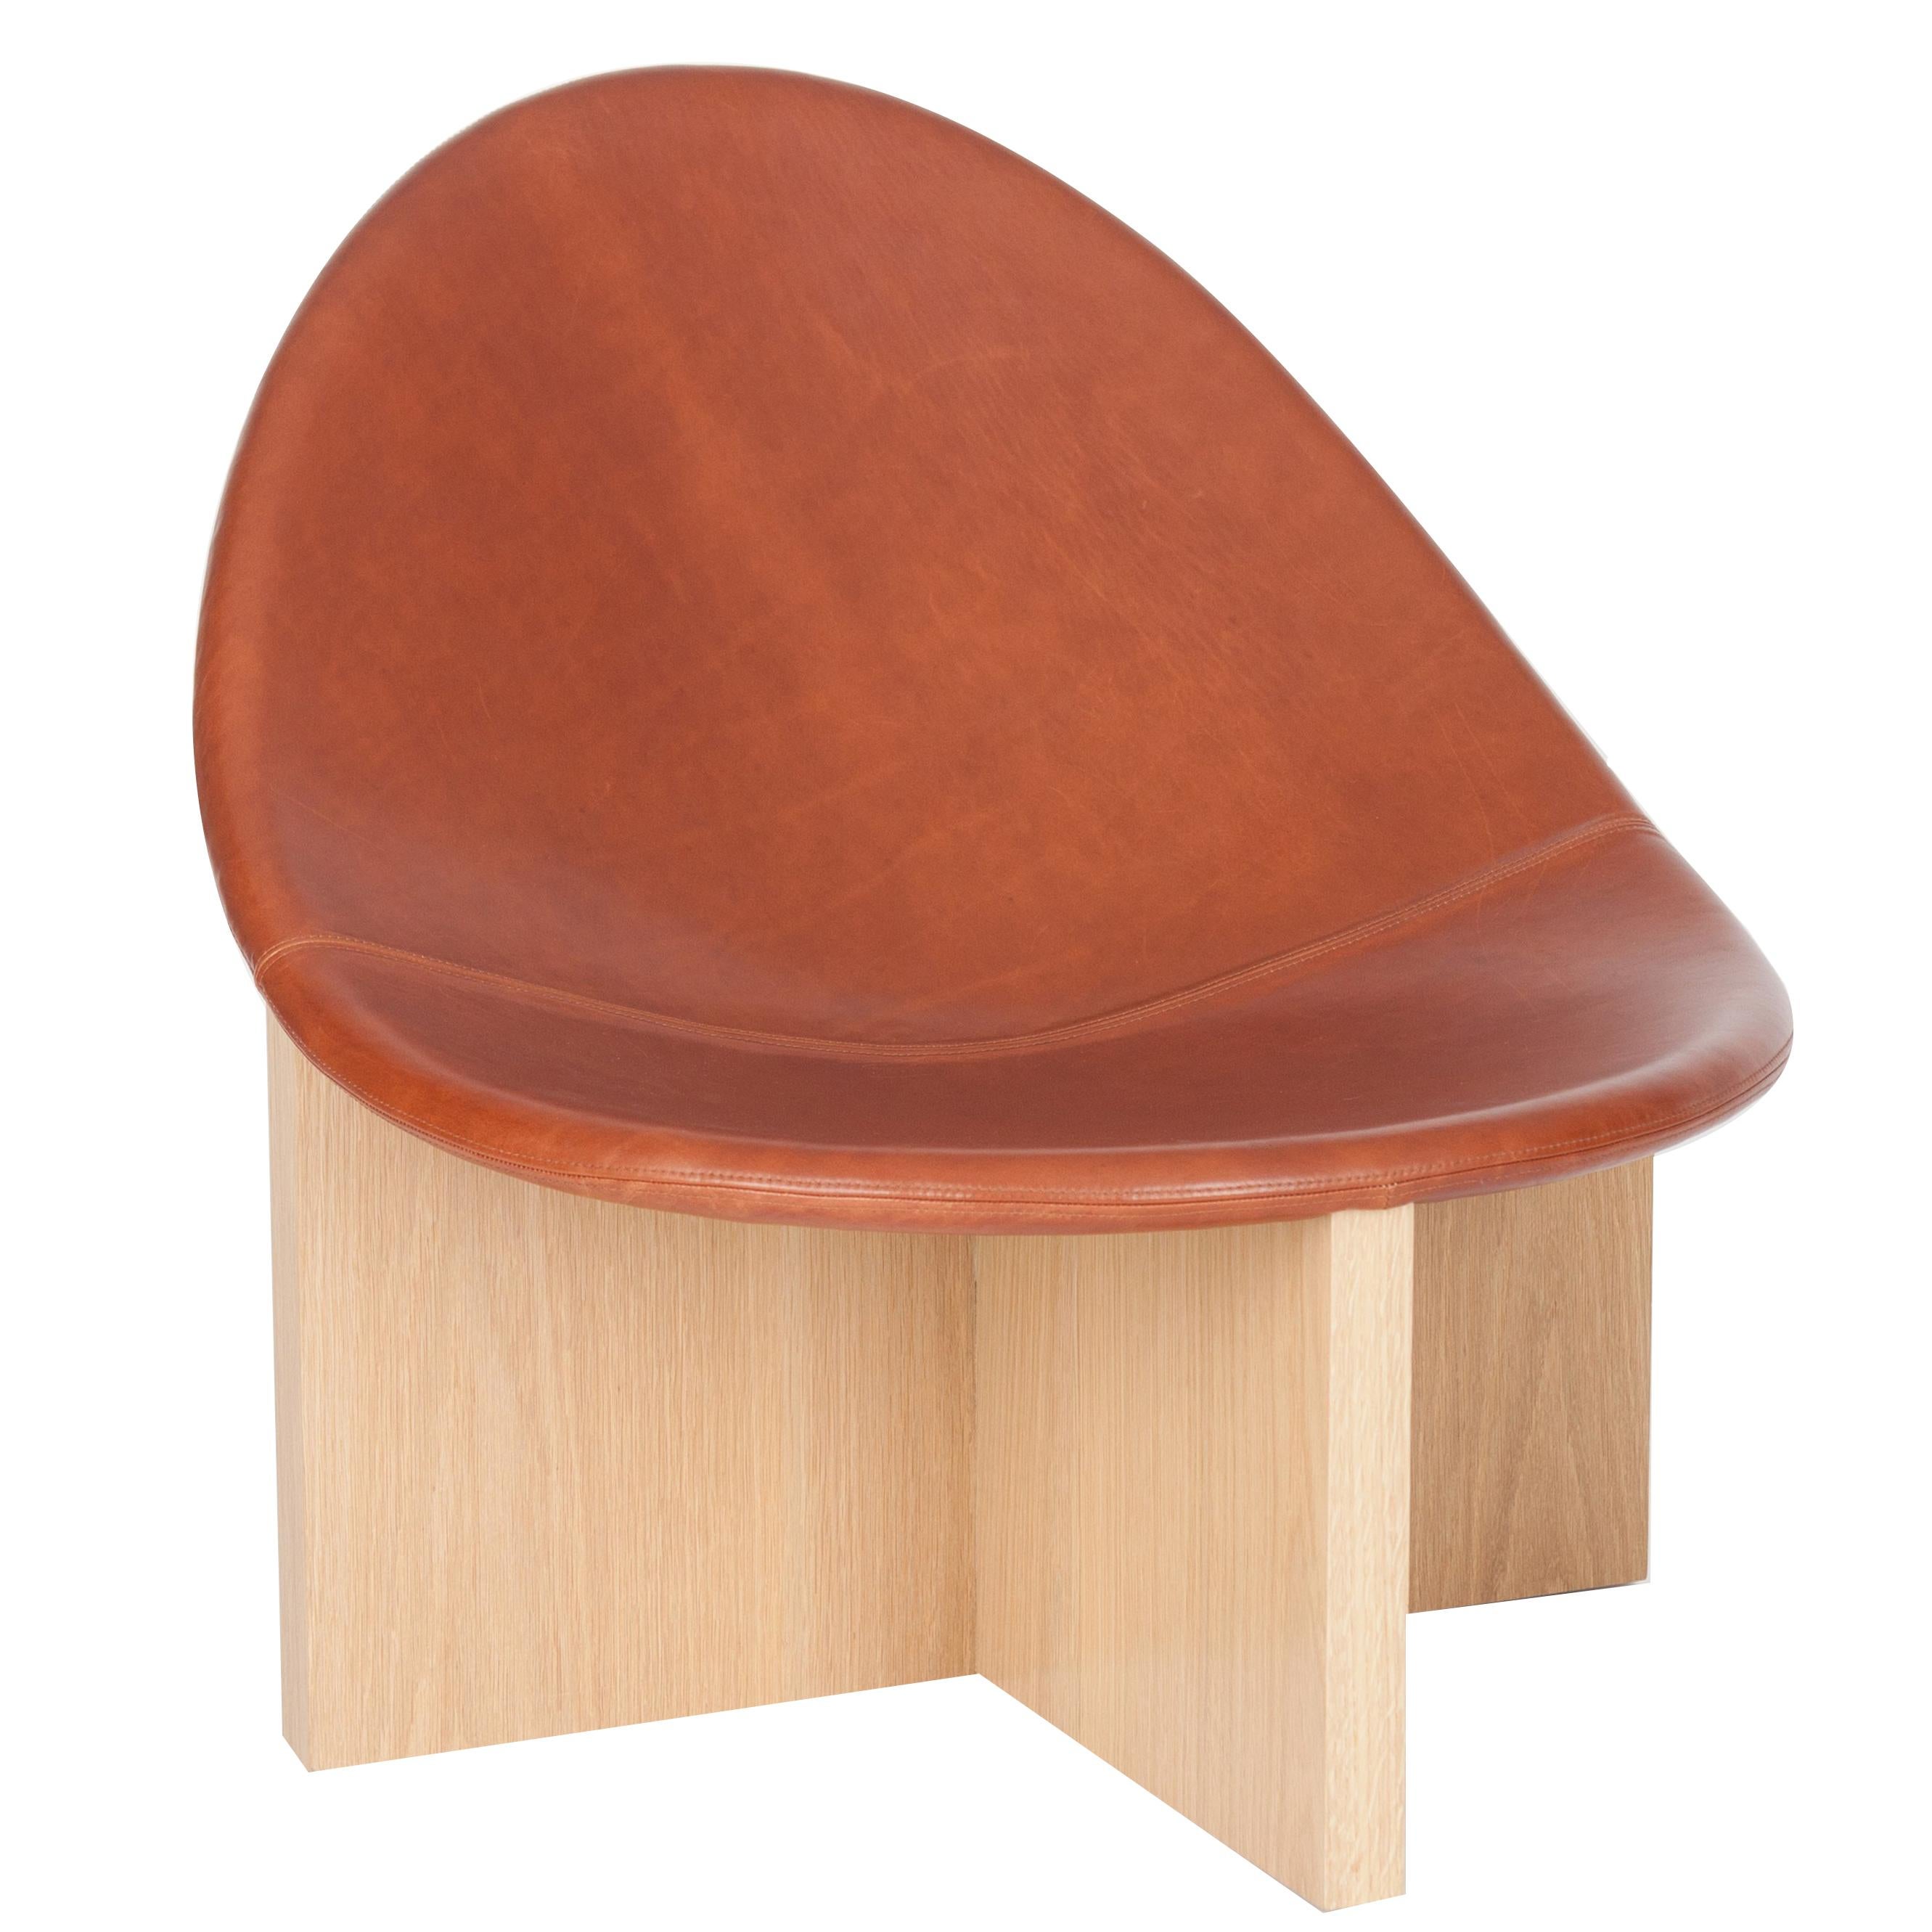 NIDO Modern Lounge Chair in Solid Maple & Cognac Leather by Estudio Persona